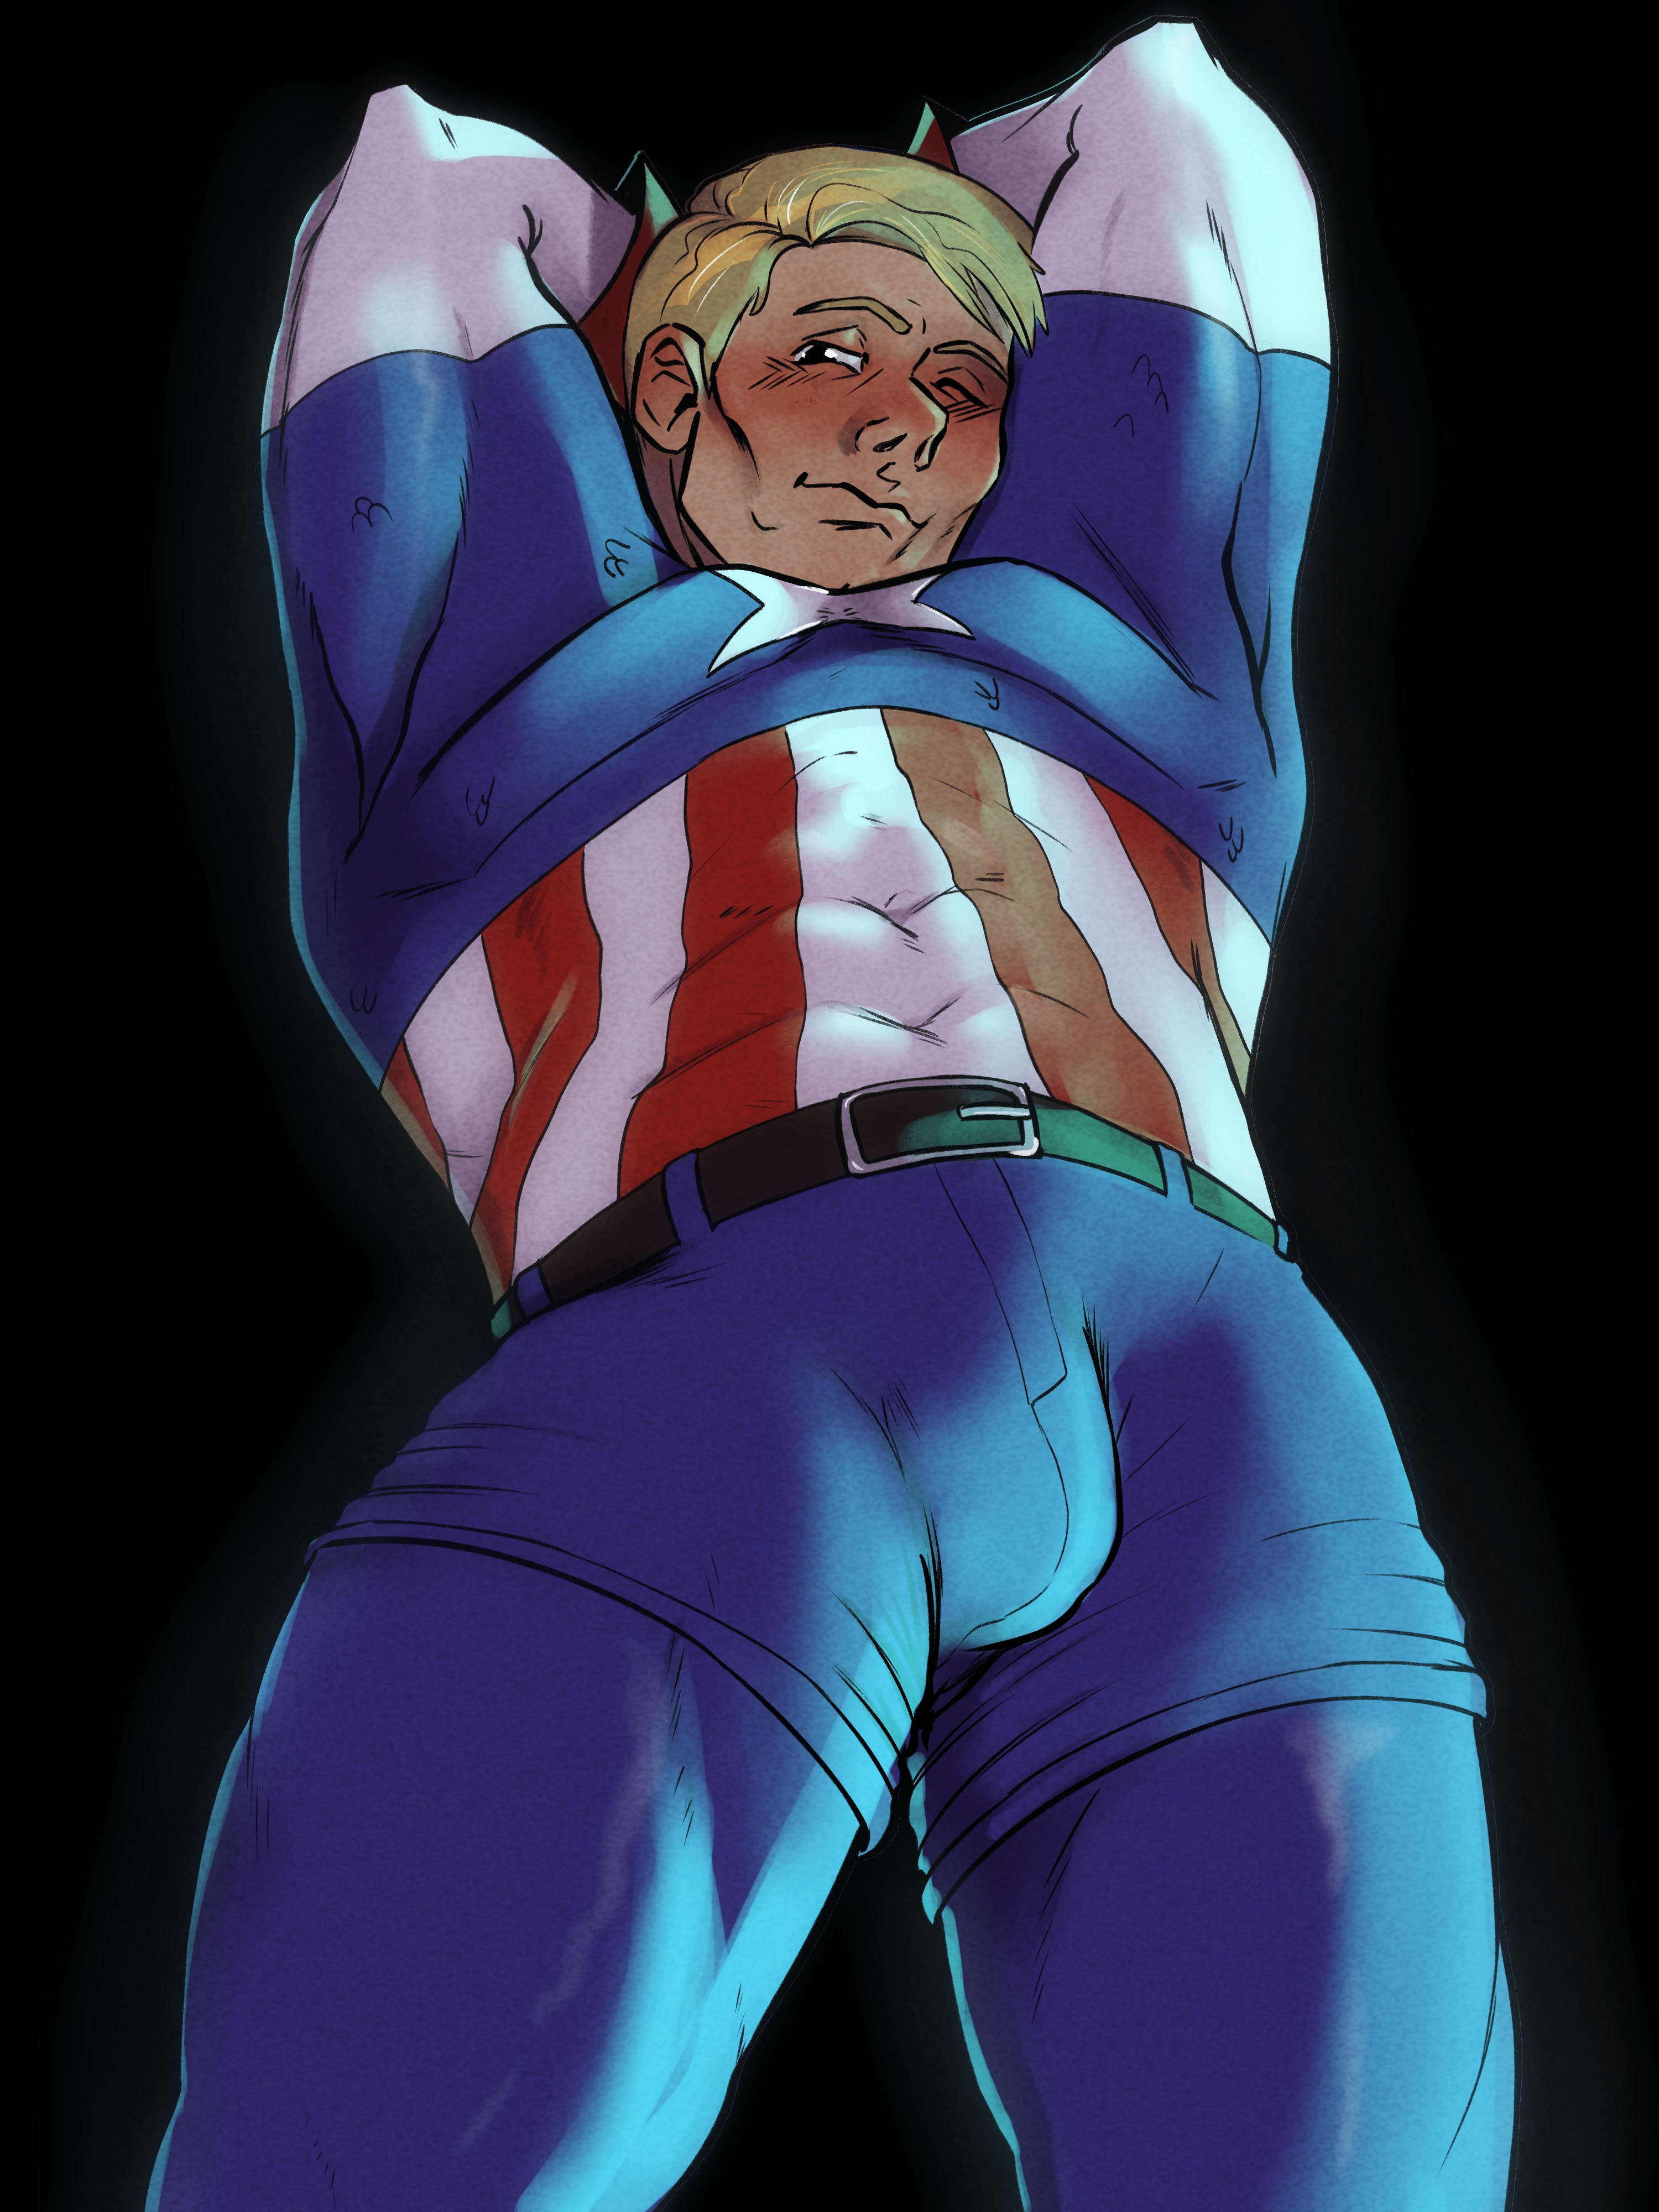 Downward view of Steve Rogers, dressed in his Captain America uniform sans helmet. He has his arms held up and resting behind his head as he looks down at the POV, a flirtly look on his face. He has a large bulge in his pants and is flexing his muscles.